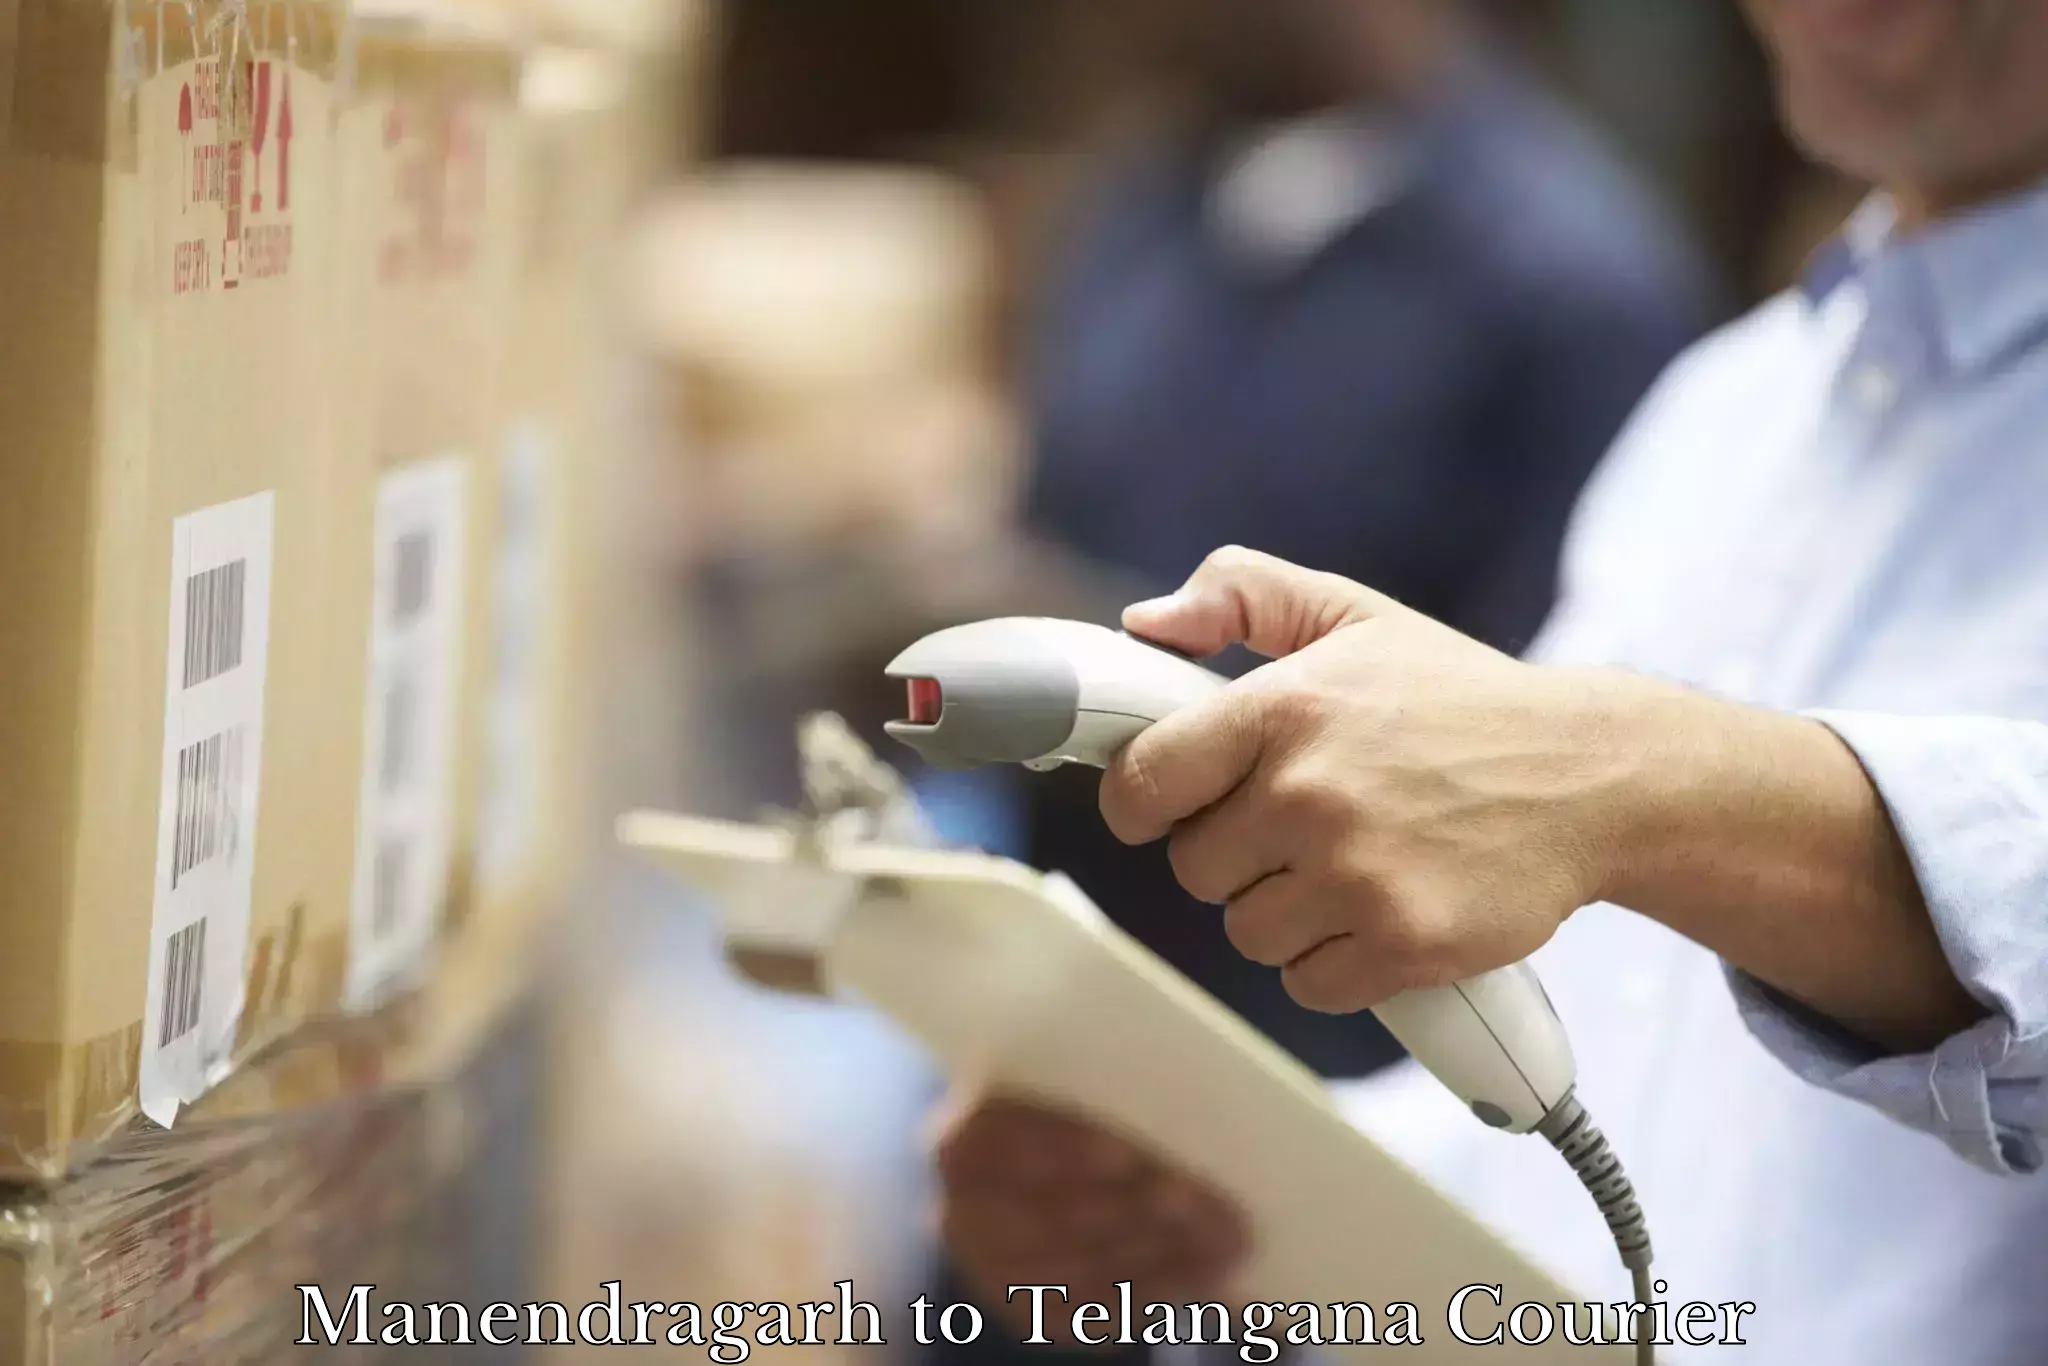 State-of-the-art courier technology Manendragarh to Kallur